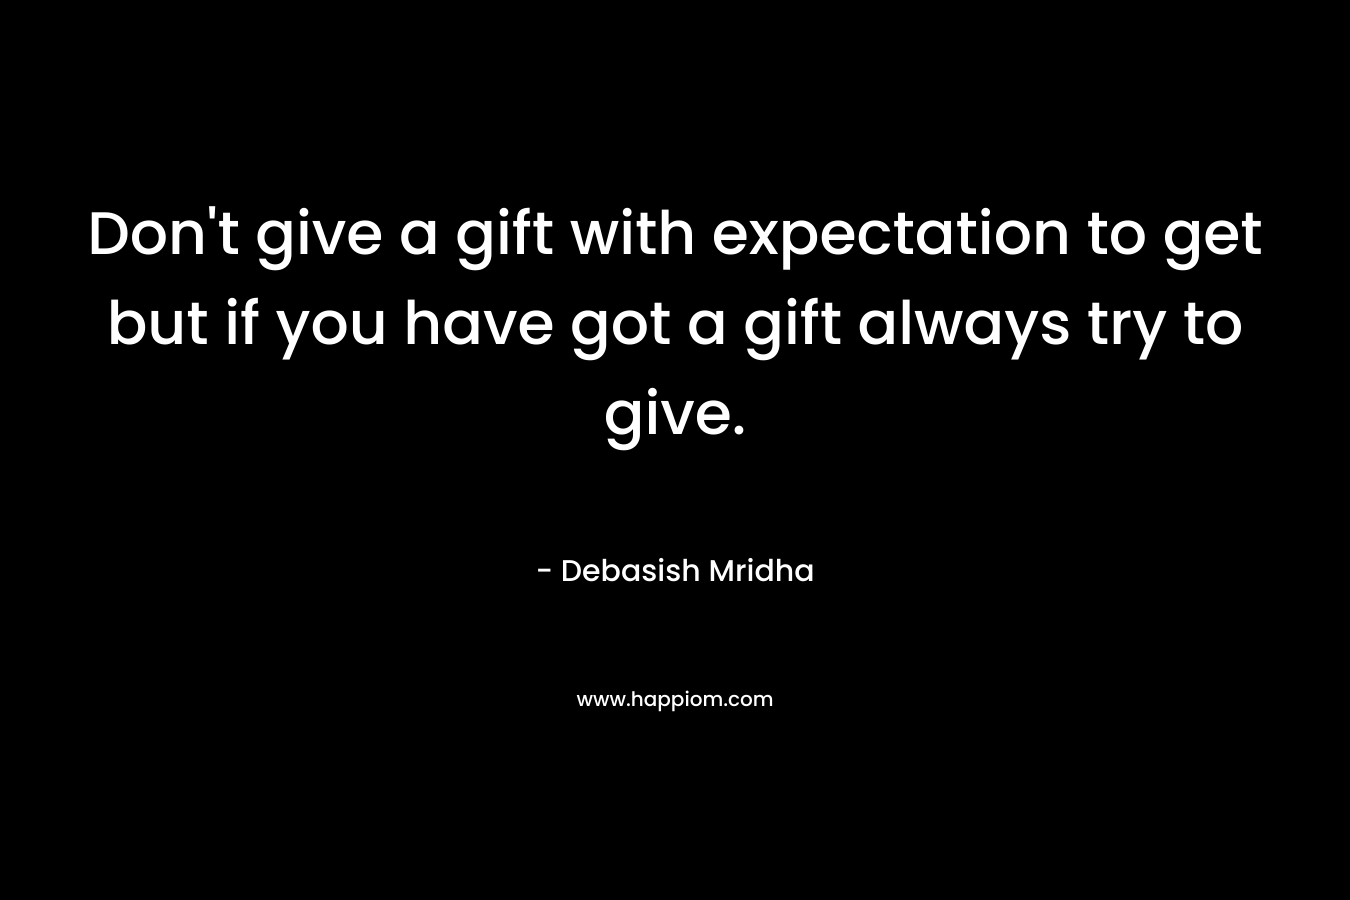 Don't give a gift with expectation to get but if you have got a gift always try to give.